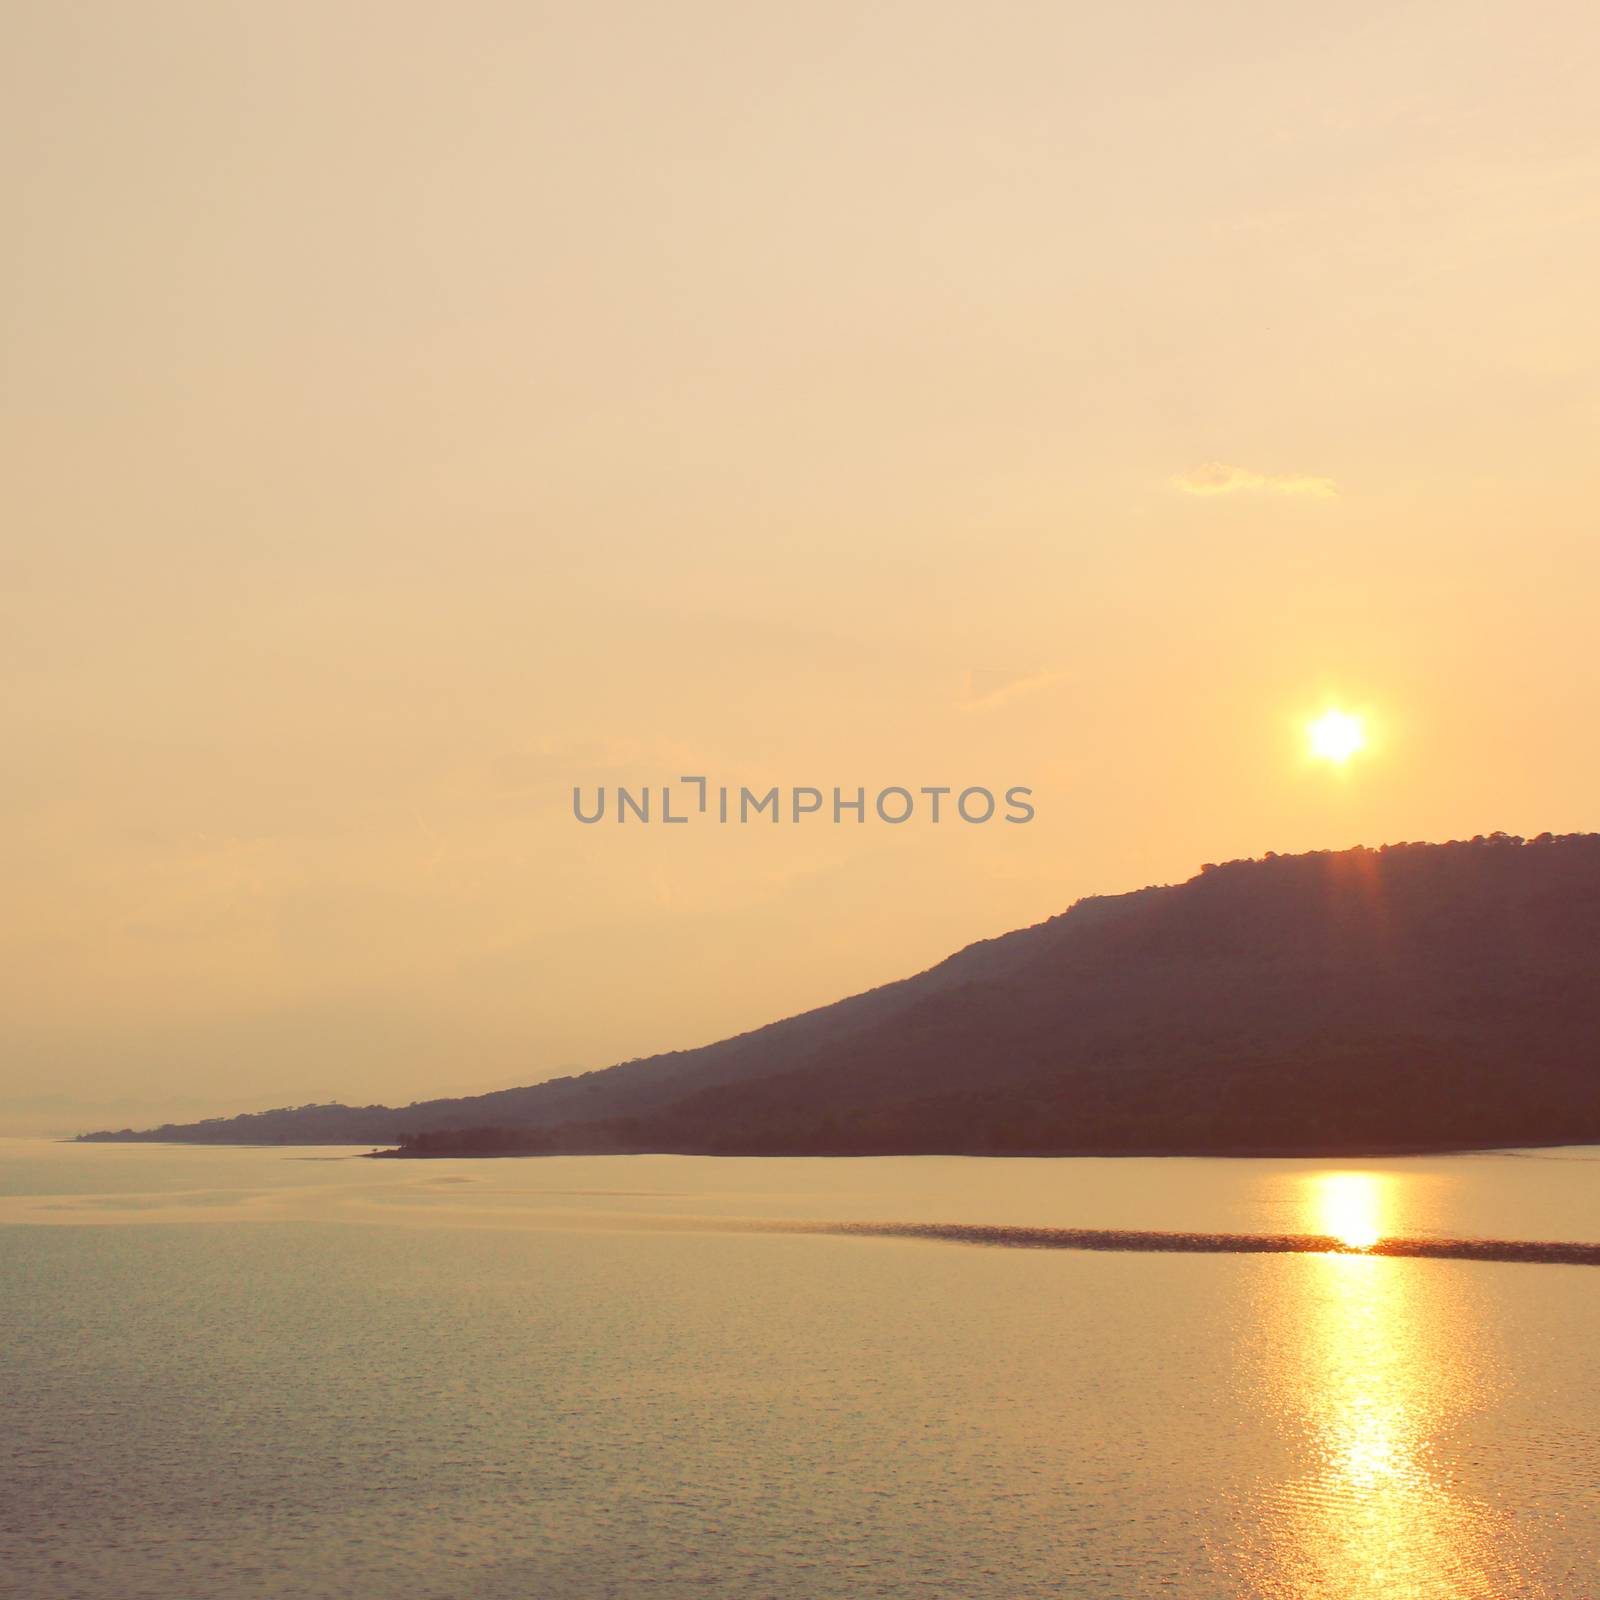 Sunrise or sunset over the sea and mountain with retro filter ef by nuchylee